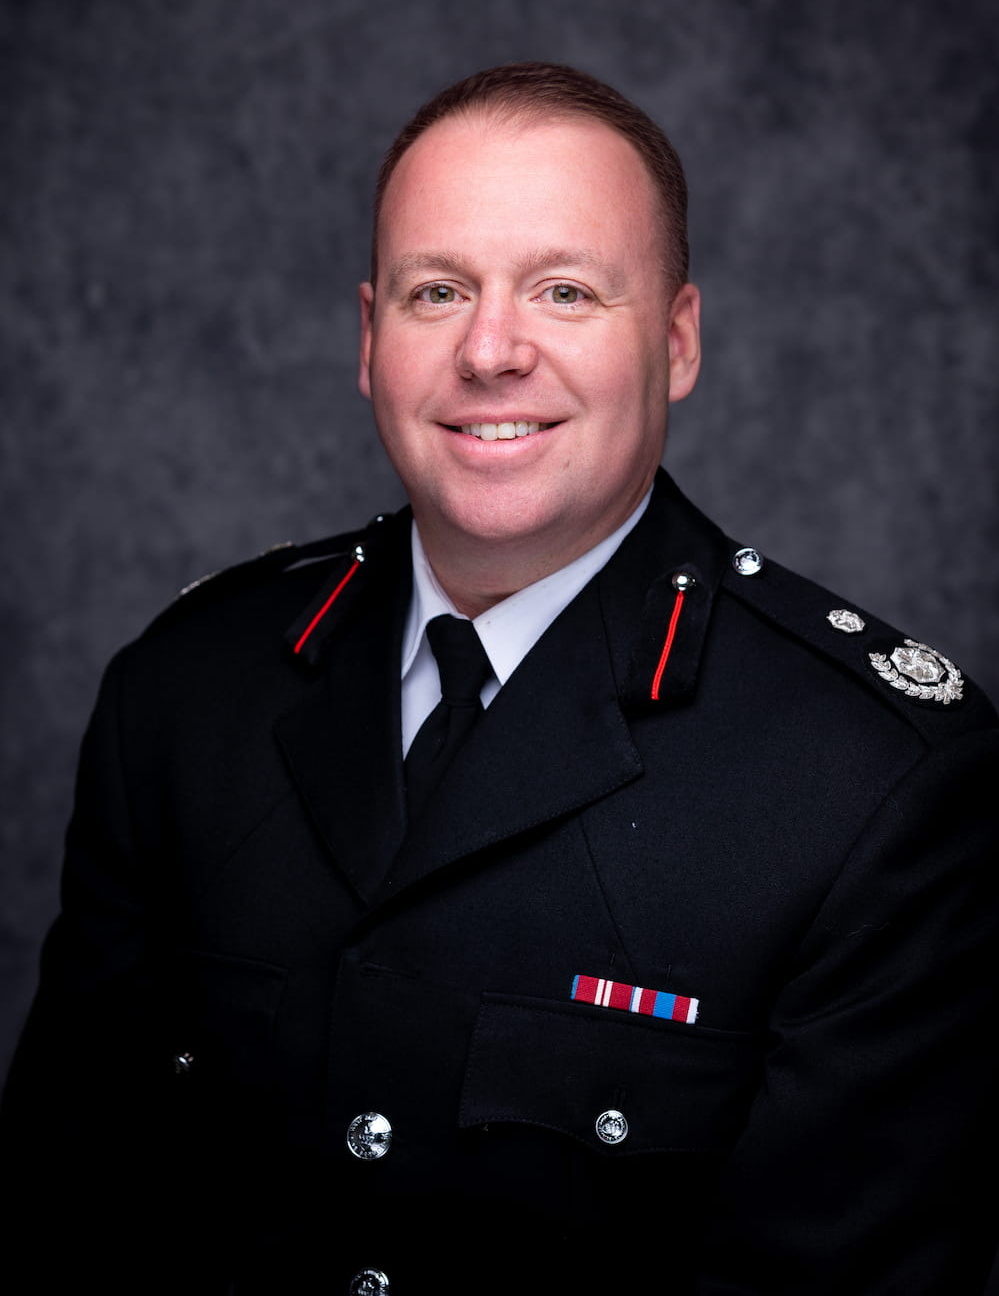 Richard Stanton - Assistant Chief Fire Officer and Director for People